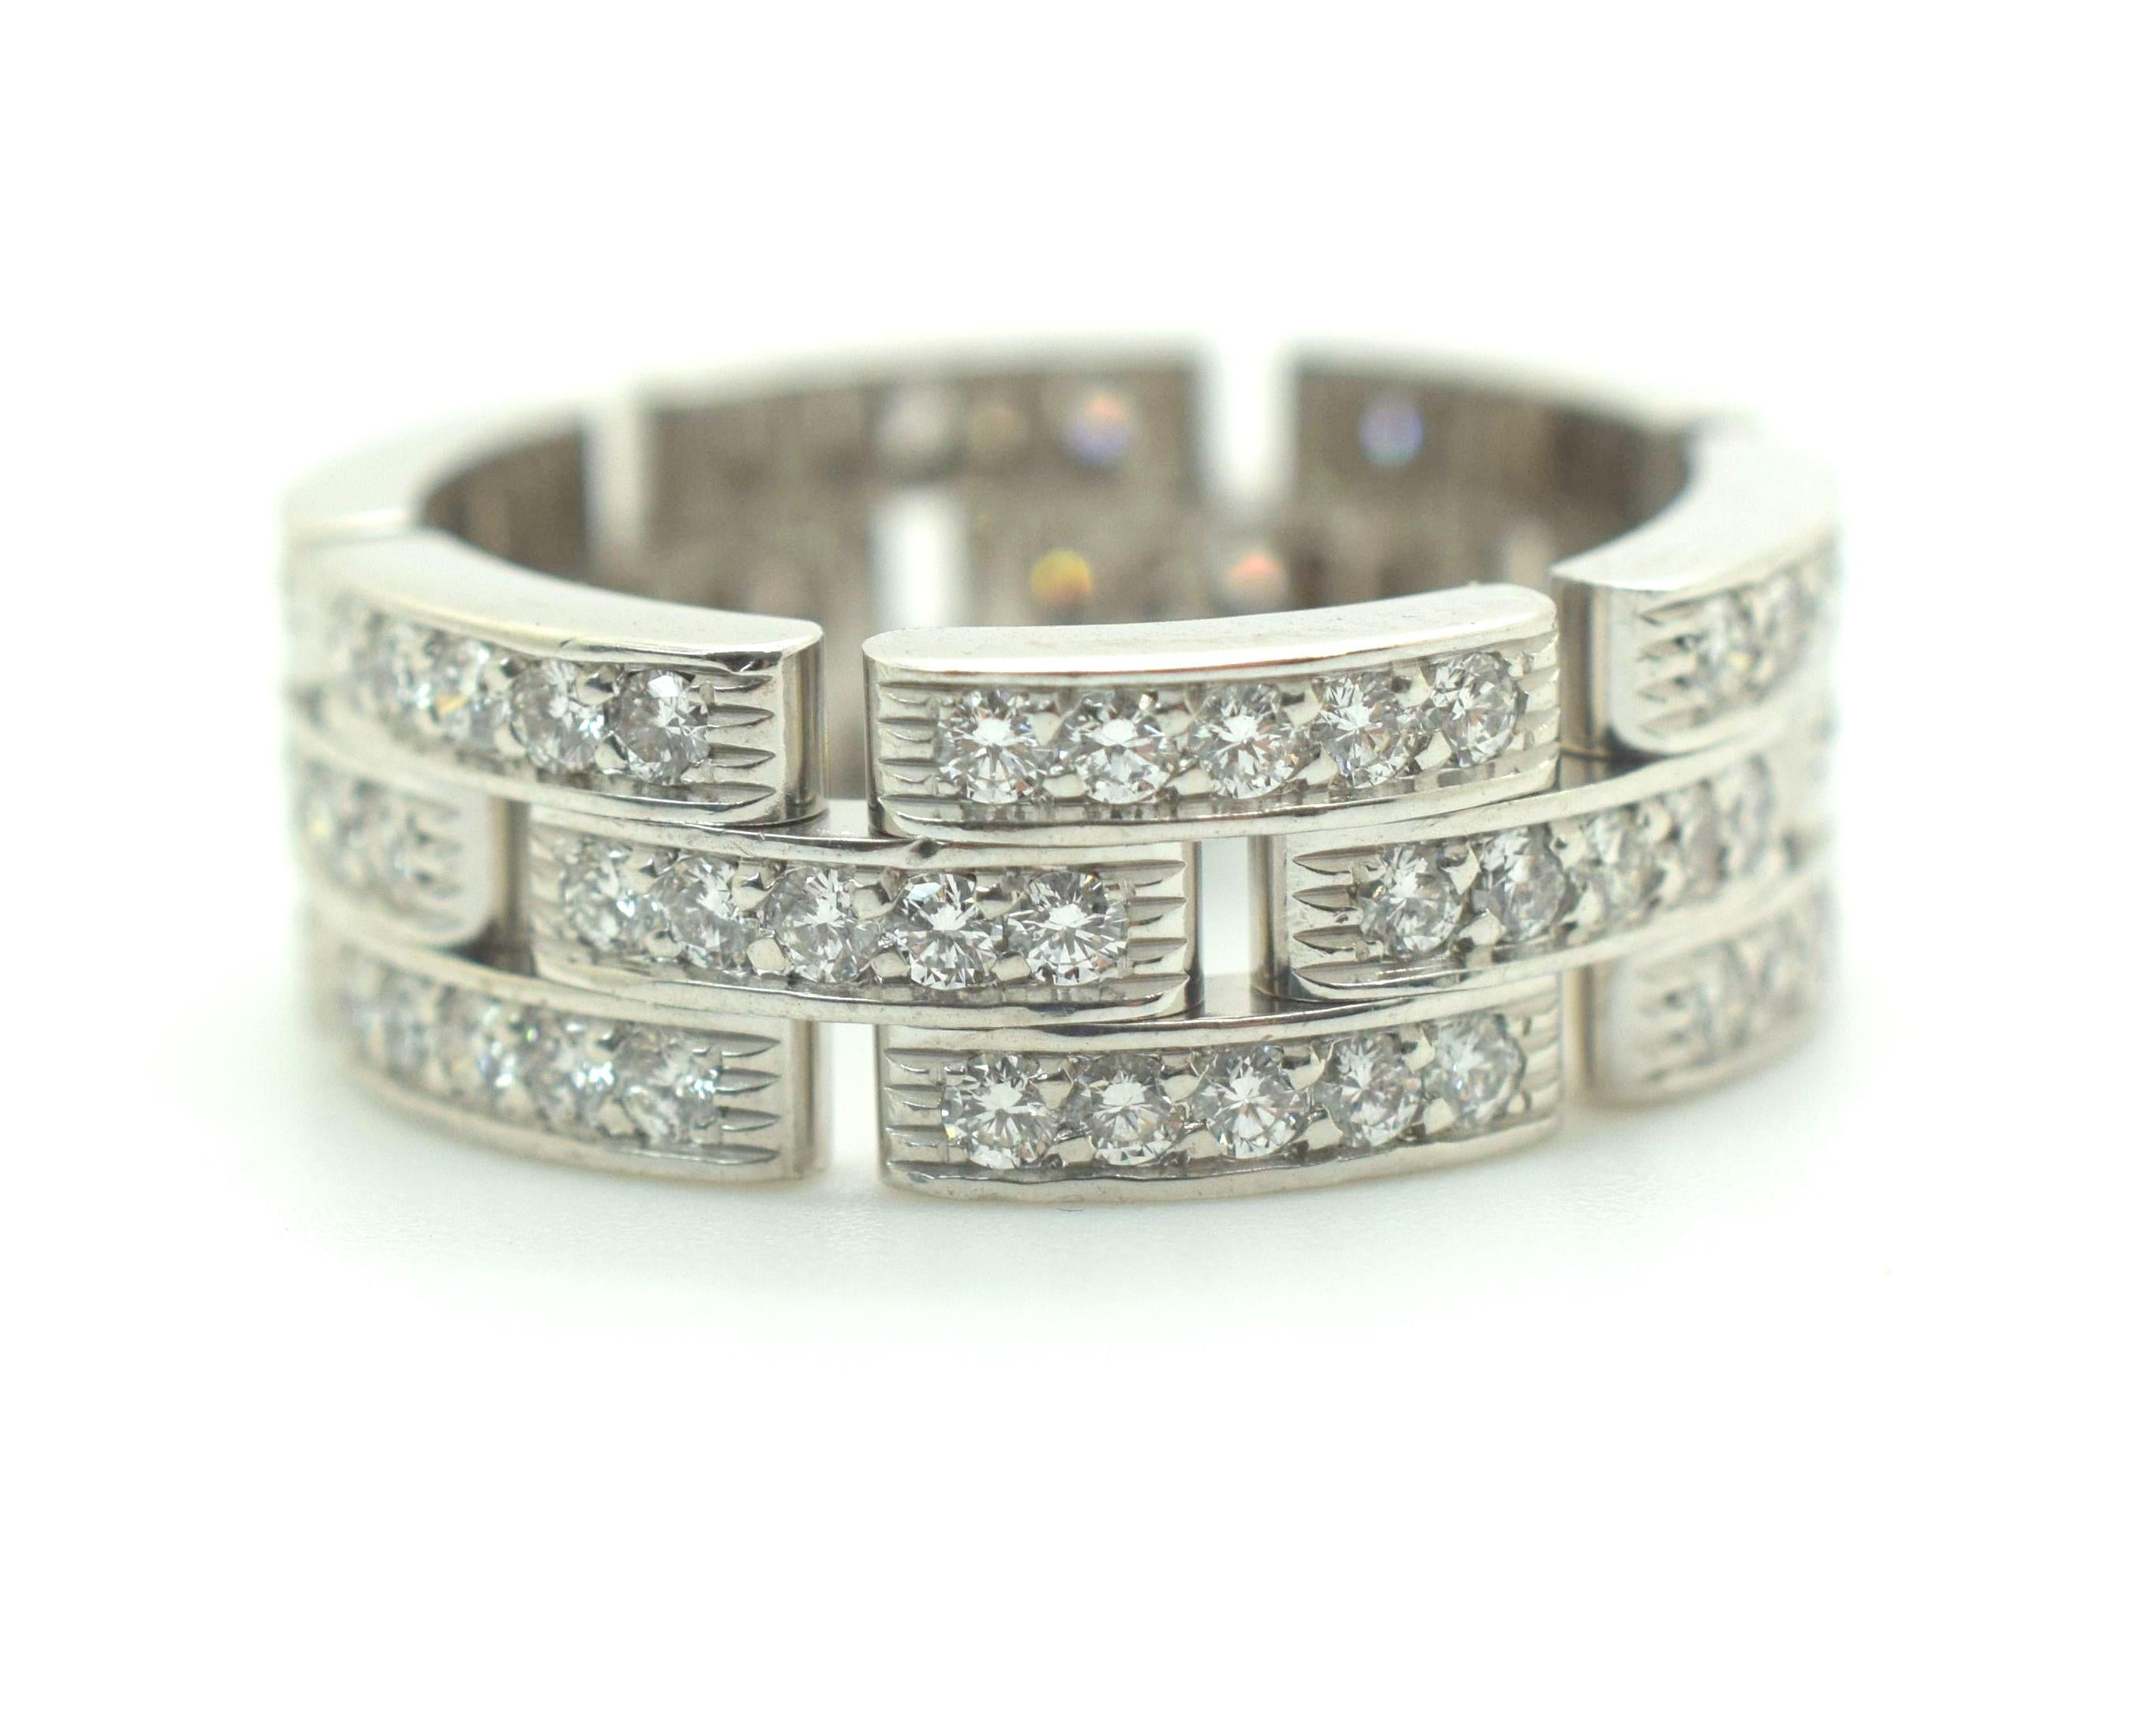 Cartier Maillon Panthère Wide Band Ring. Three rows of interlocking pave set diamond links in 18K White Gold. Carat Total Weight: 1.44 Color: E-F Clarity: VVS1 Signed Cartier and Numbered. Cartier size 60 U.S. Size 9. Not sizable.
Comes with